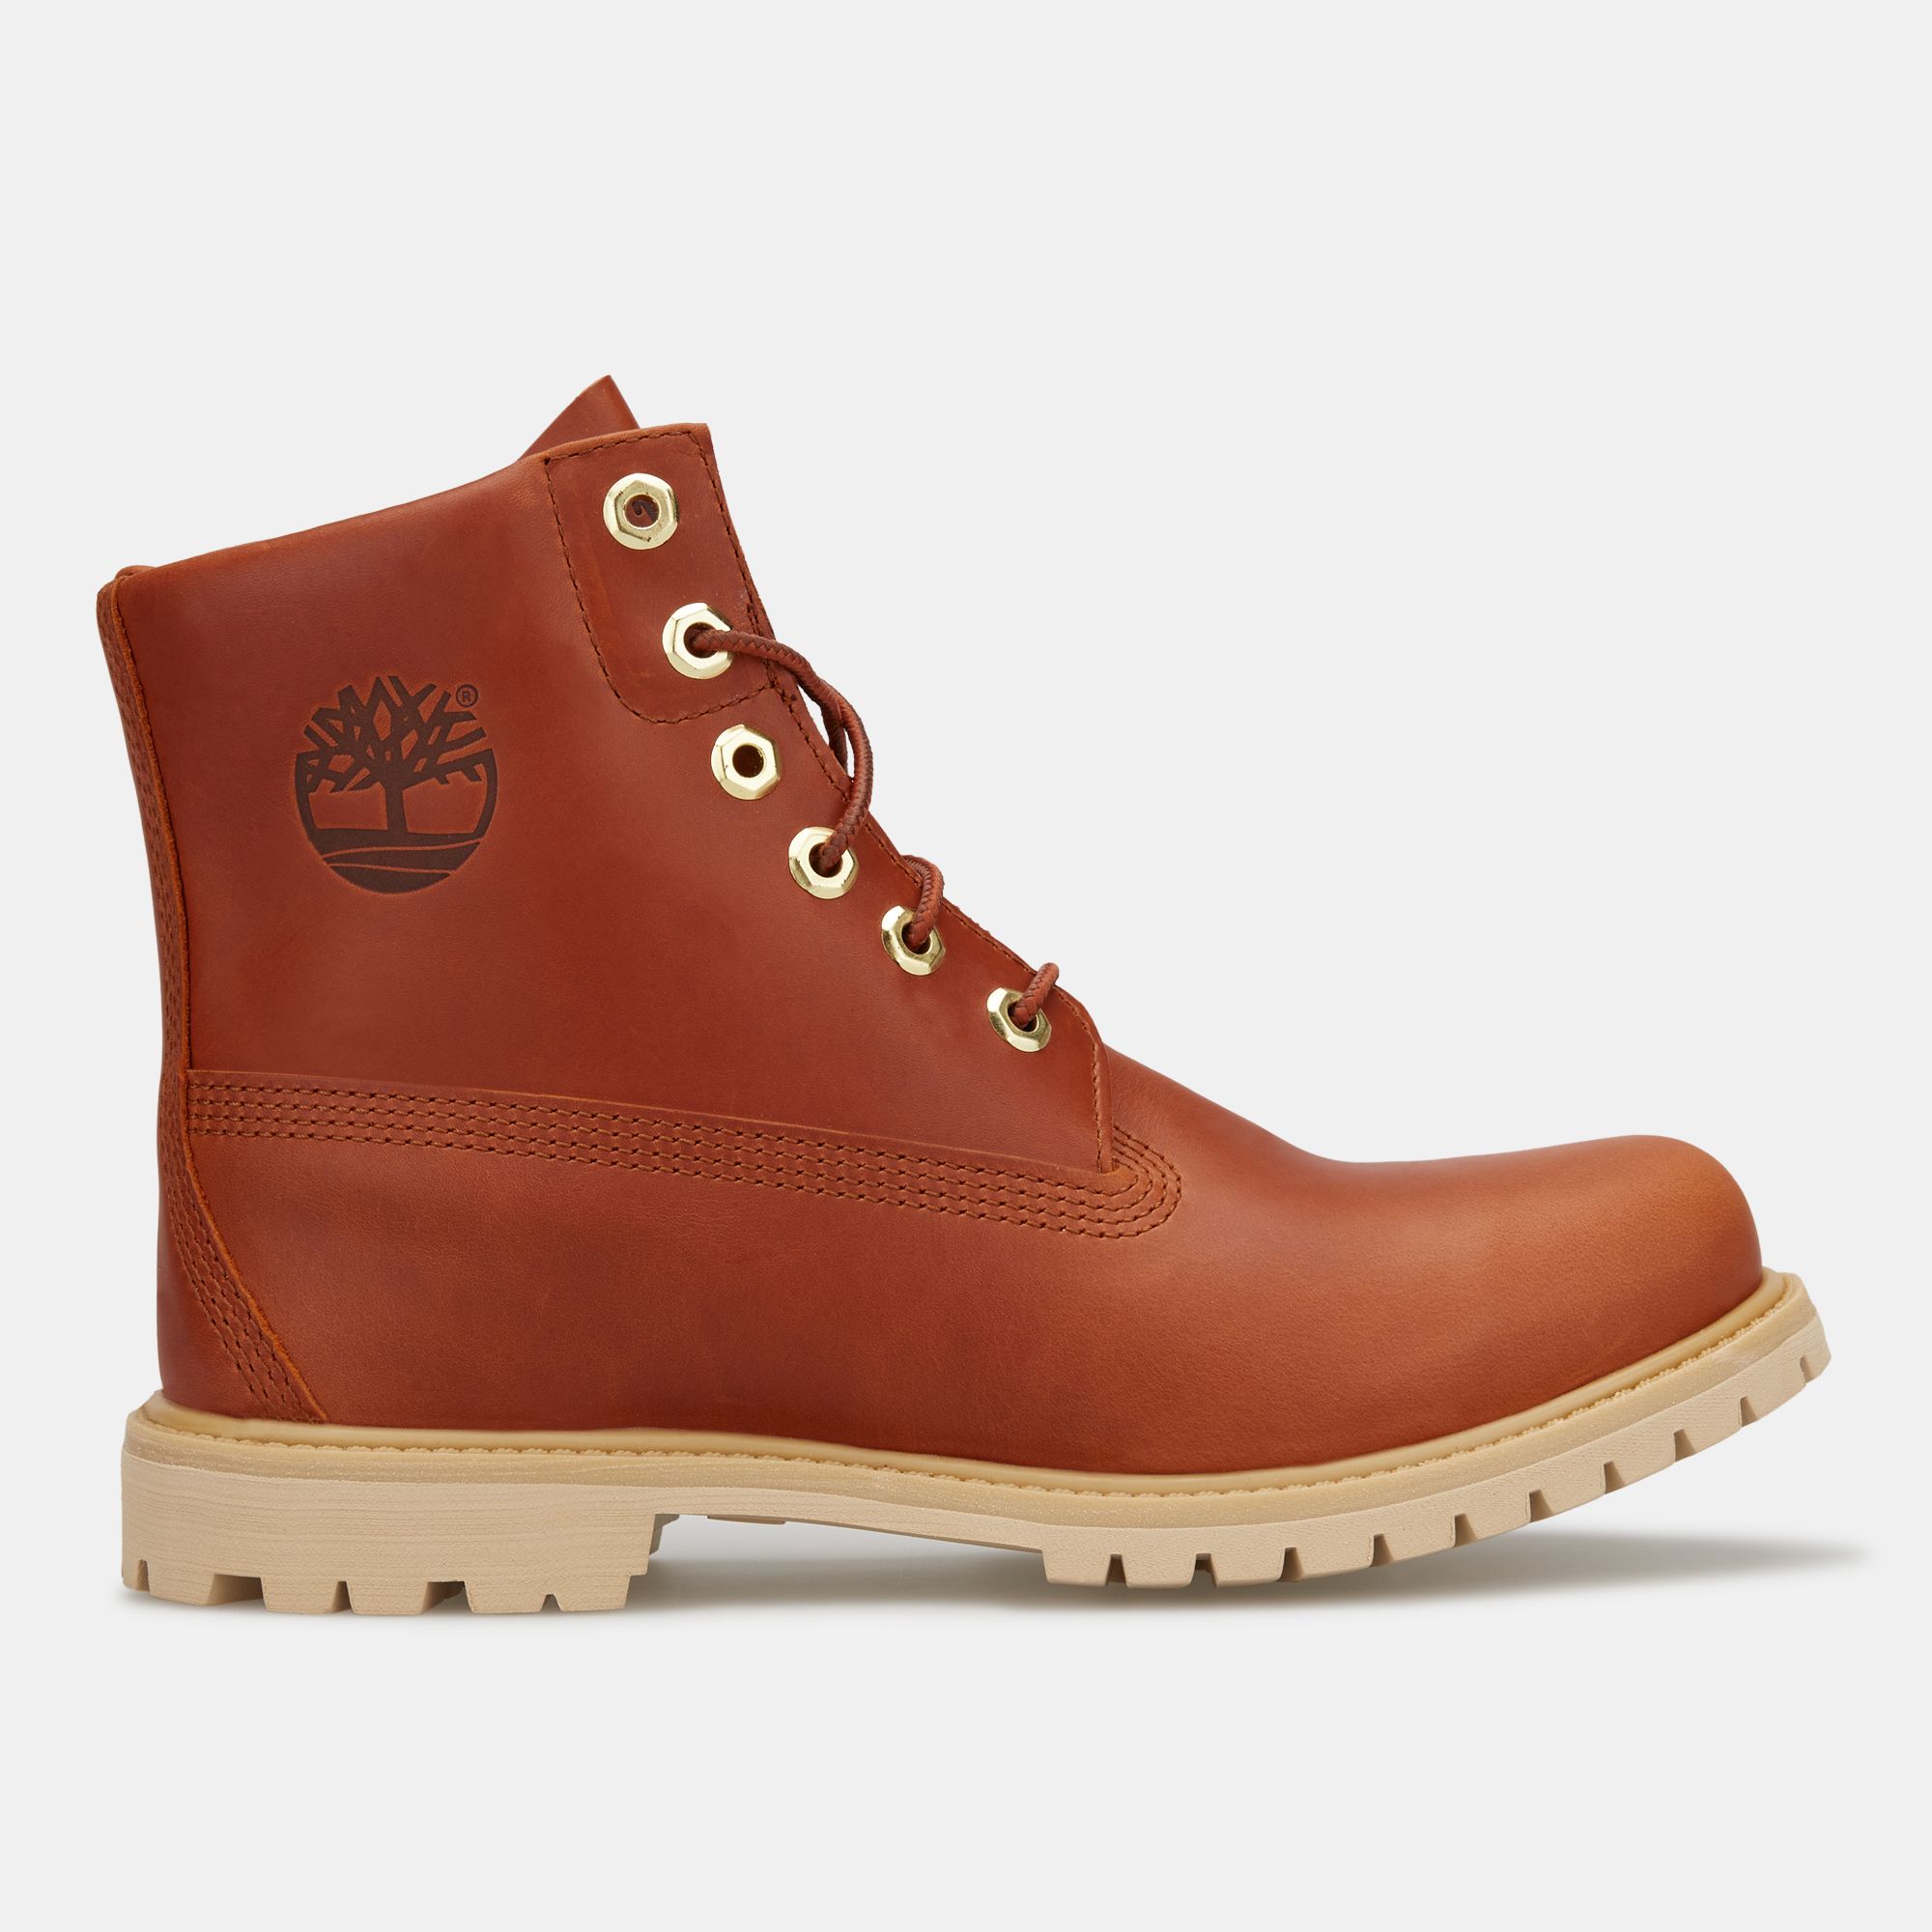 timberland boxing day sale